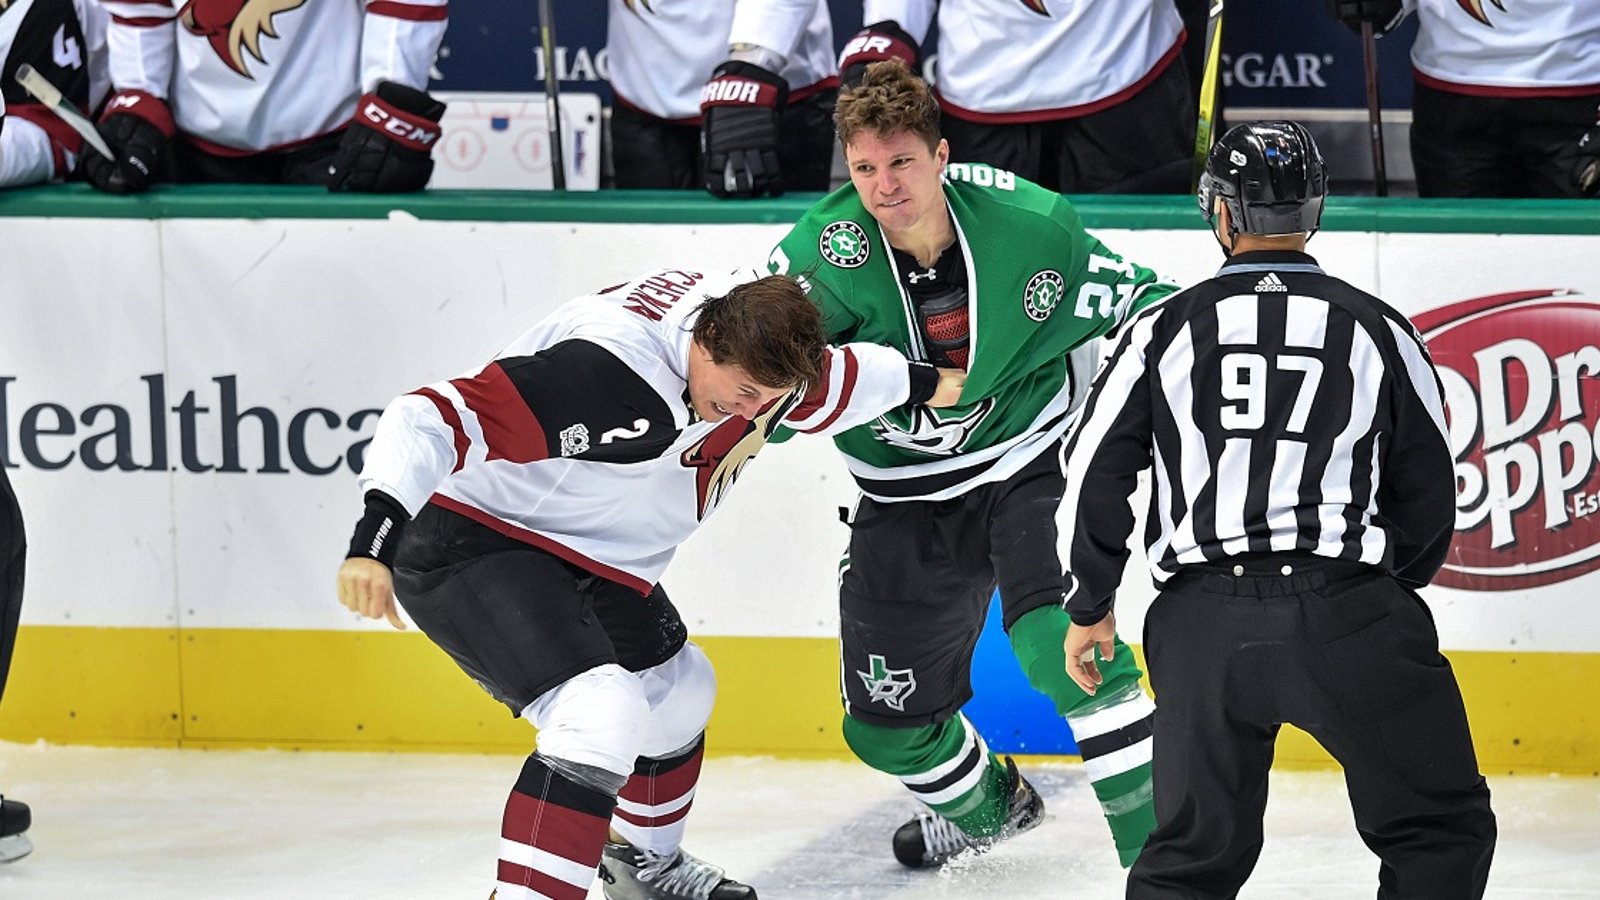 Antoine Roussel agrees to a PTO. - HockeyFeed